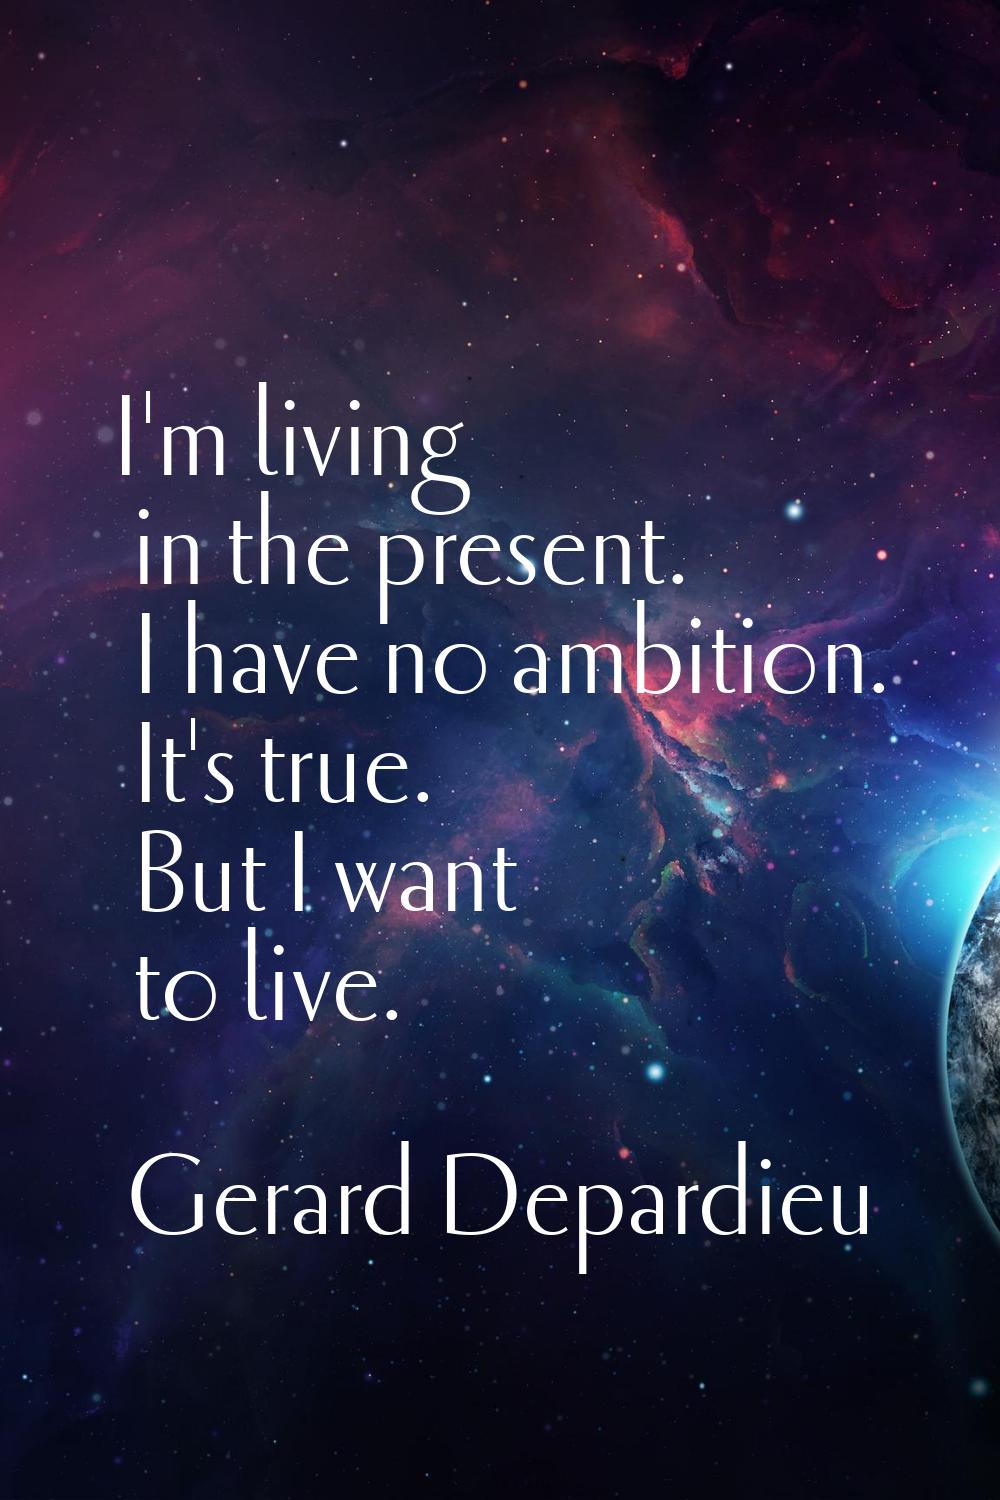 I'm living in the present. I have no ambition. It's true. But I want to live.